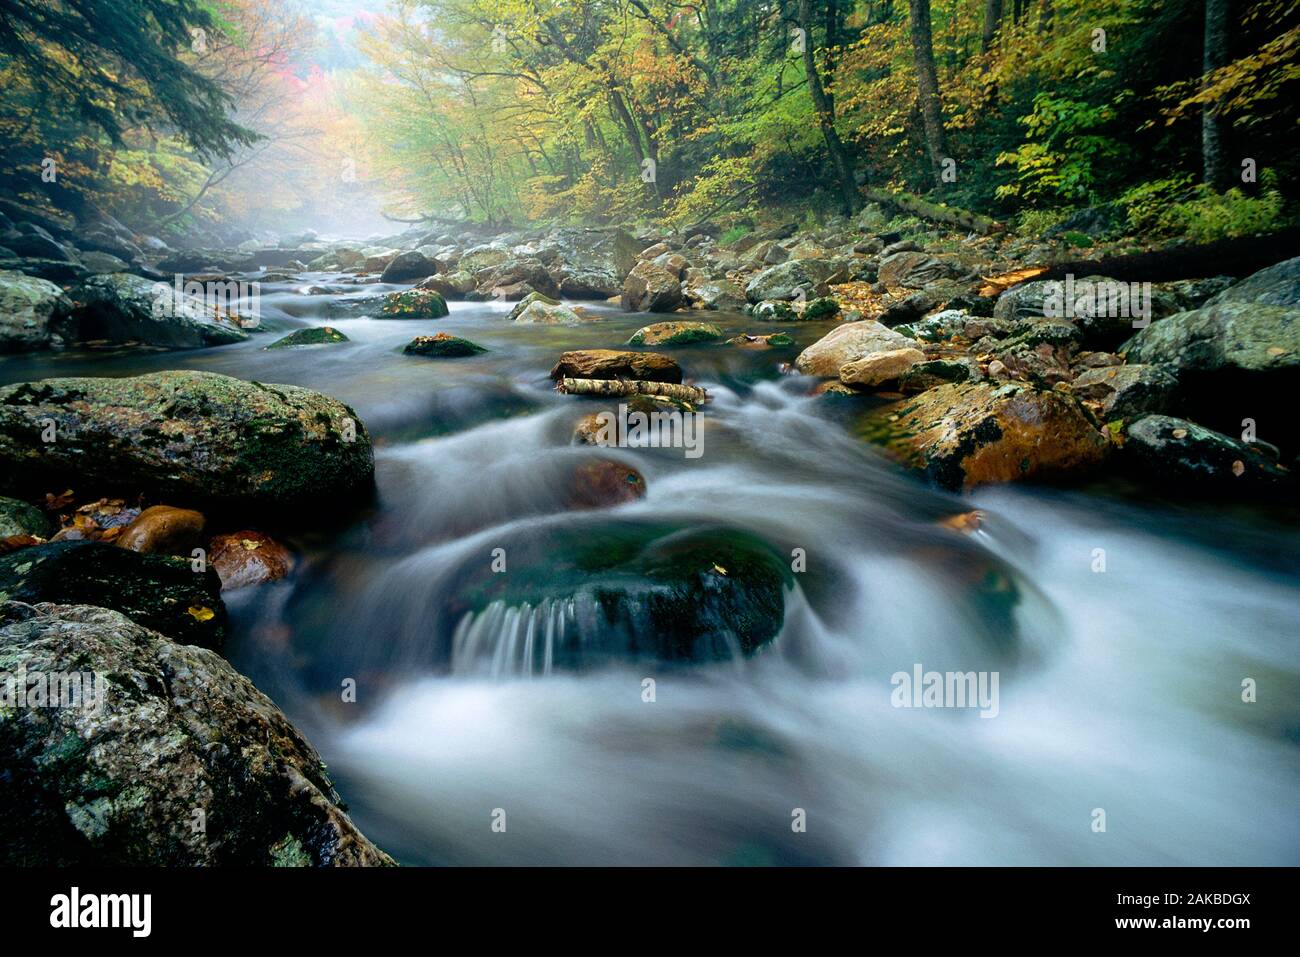 Landscape with rocks in stream in forest, Green Mountain National Forest, Vermont, USA Stock Photo